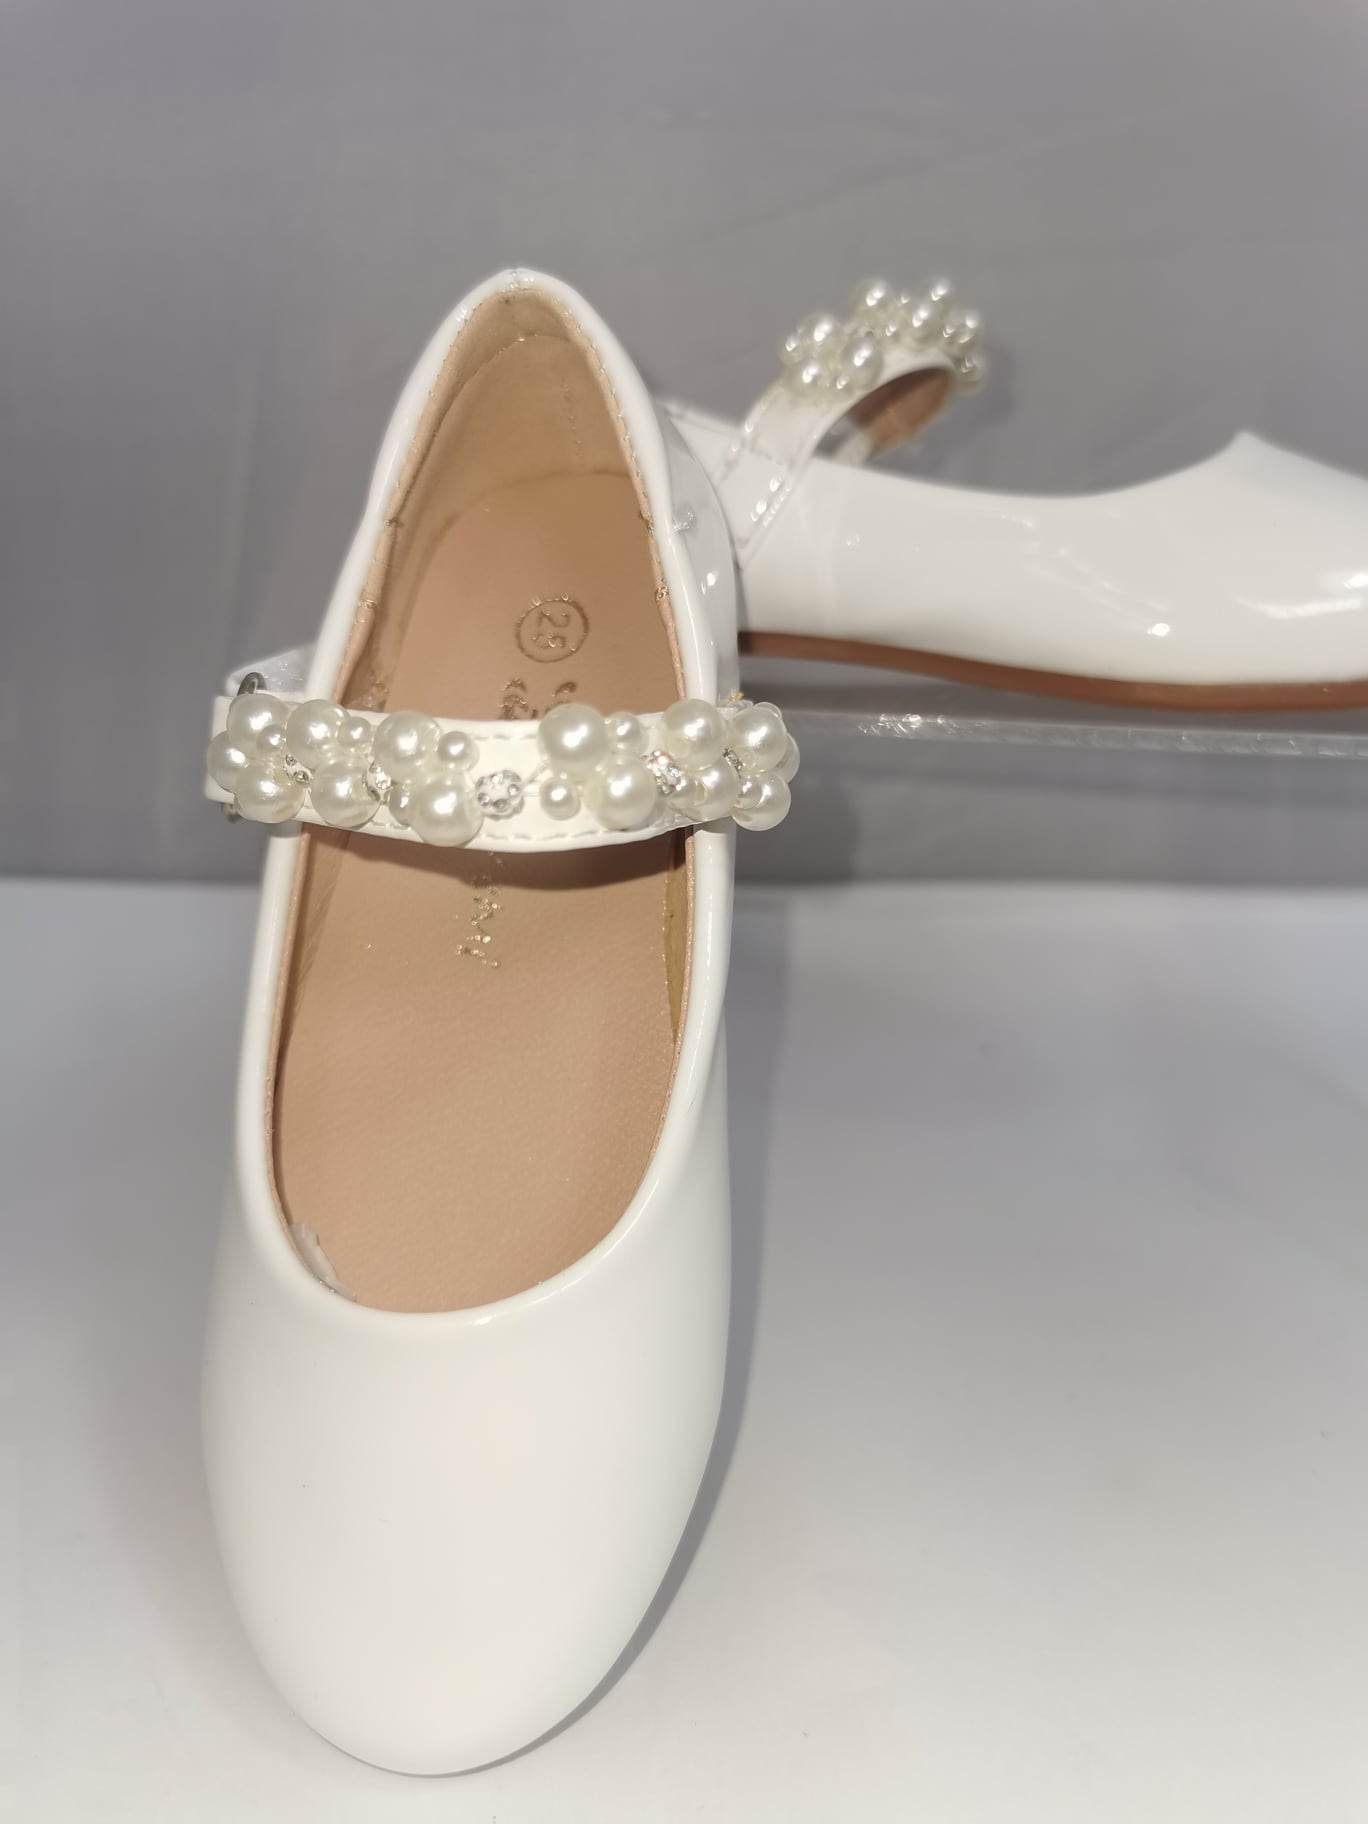 SHOES DOREMI 23/23 MONOC. BALLERINA WITH PEARLS DETAILS